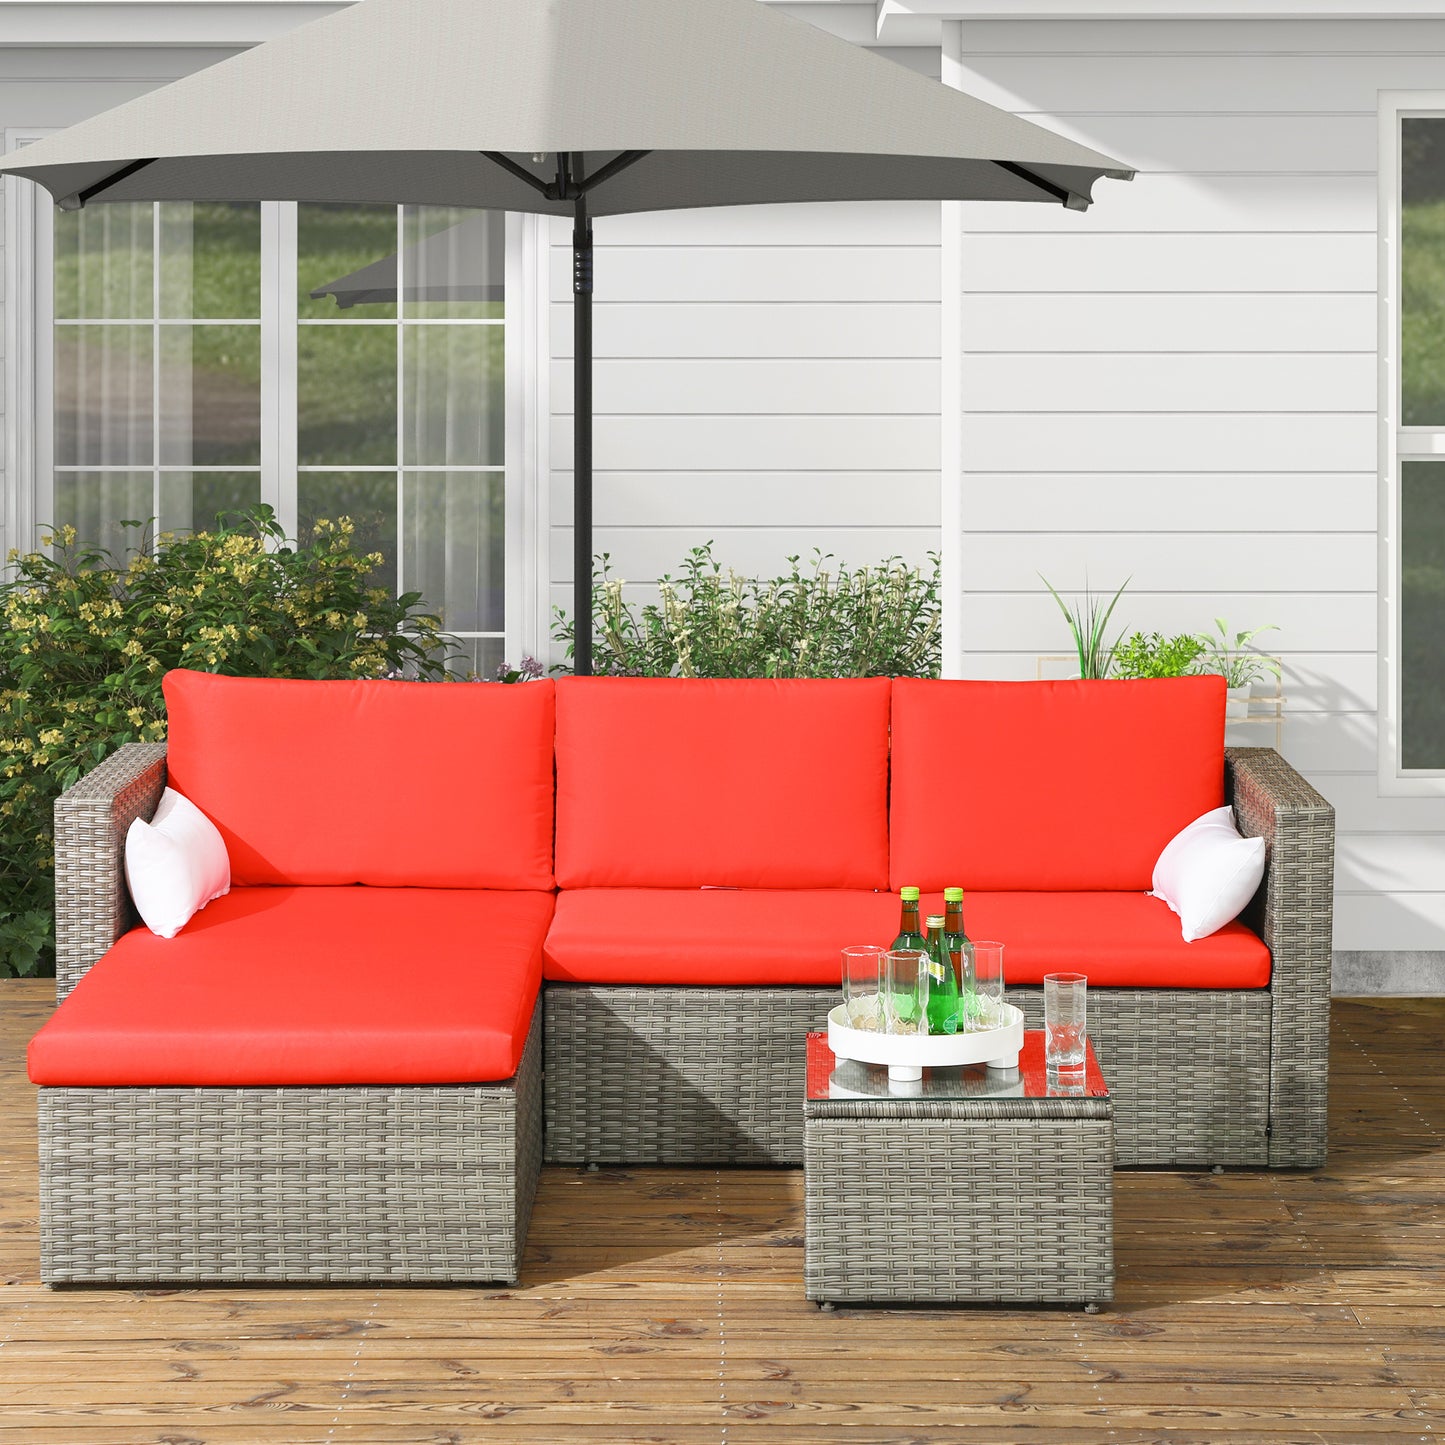 3pcs Modern Rattan Sofa Set, Wicker Patio Furniture Set with Coffee Table, Cushions, Pillows Patio Furniture Sets   at Gallery Canada